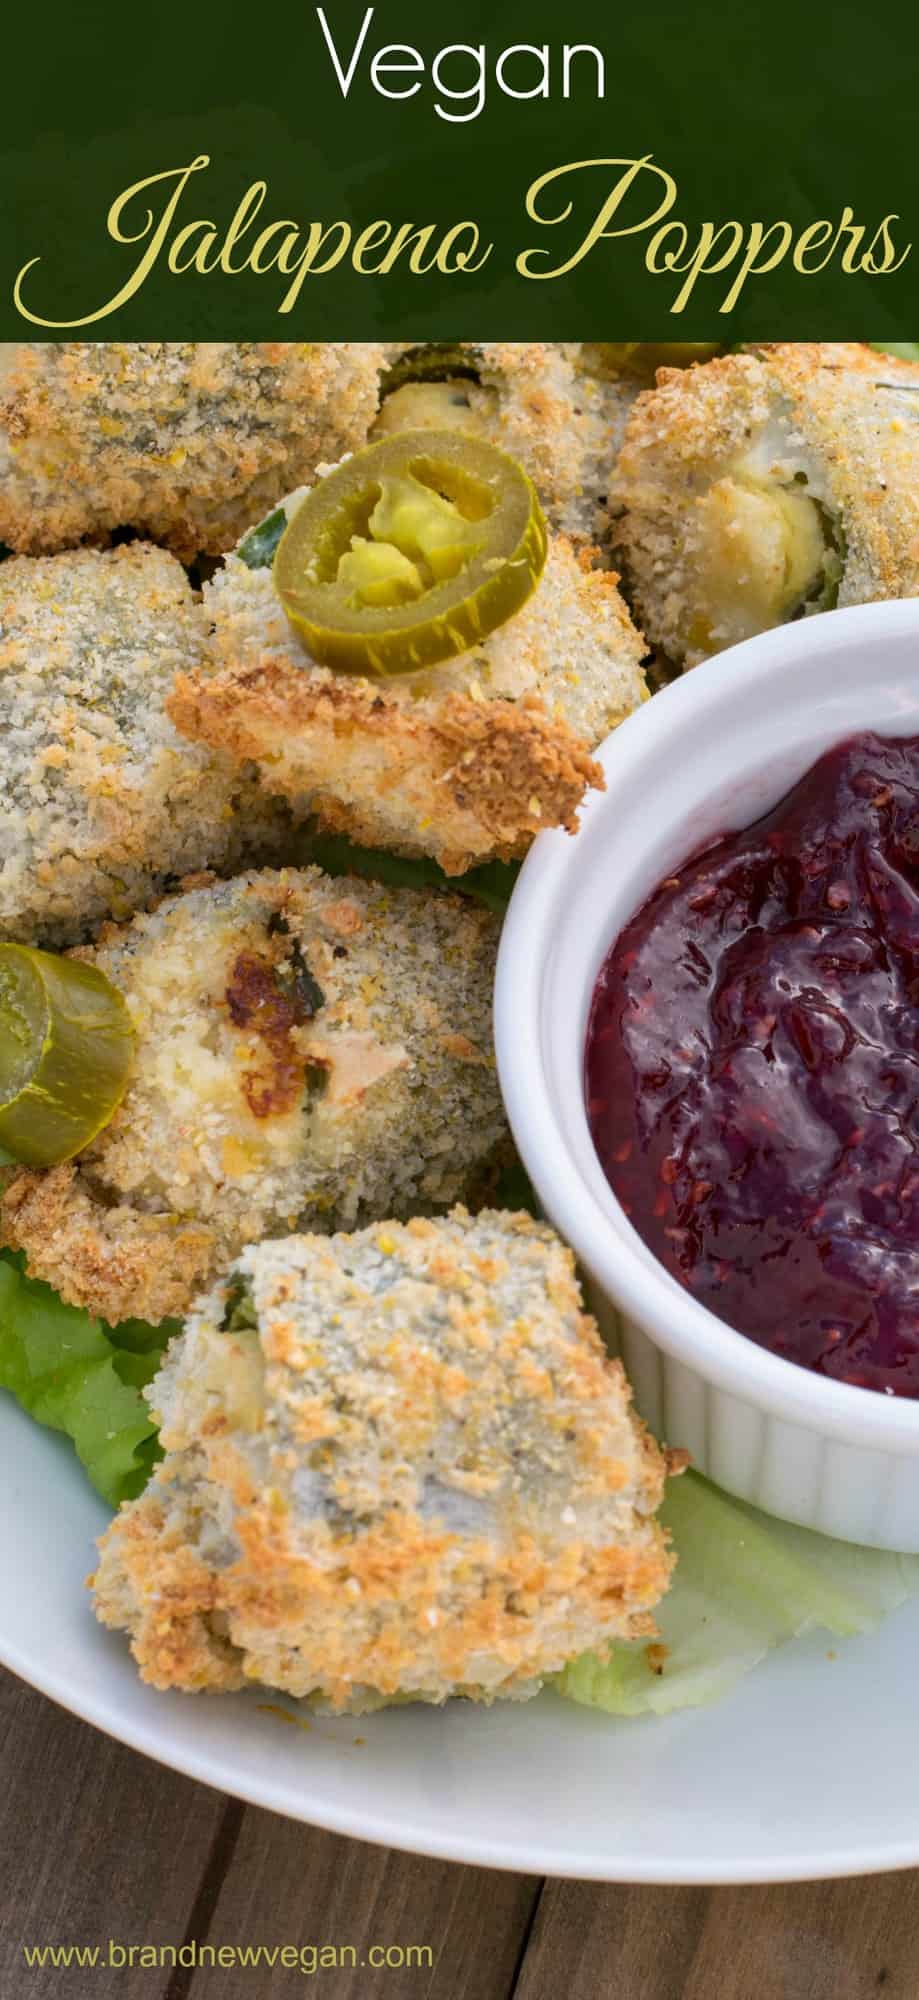 Want a healthier snack for the big game this year? Then you gotta try these Vegan Jalapeno Poppers! That's right, fresh Jalapenos stuffed with a dairy-free Cream Cheese and then air-fried to crispy perfection.